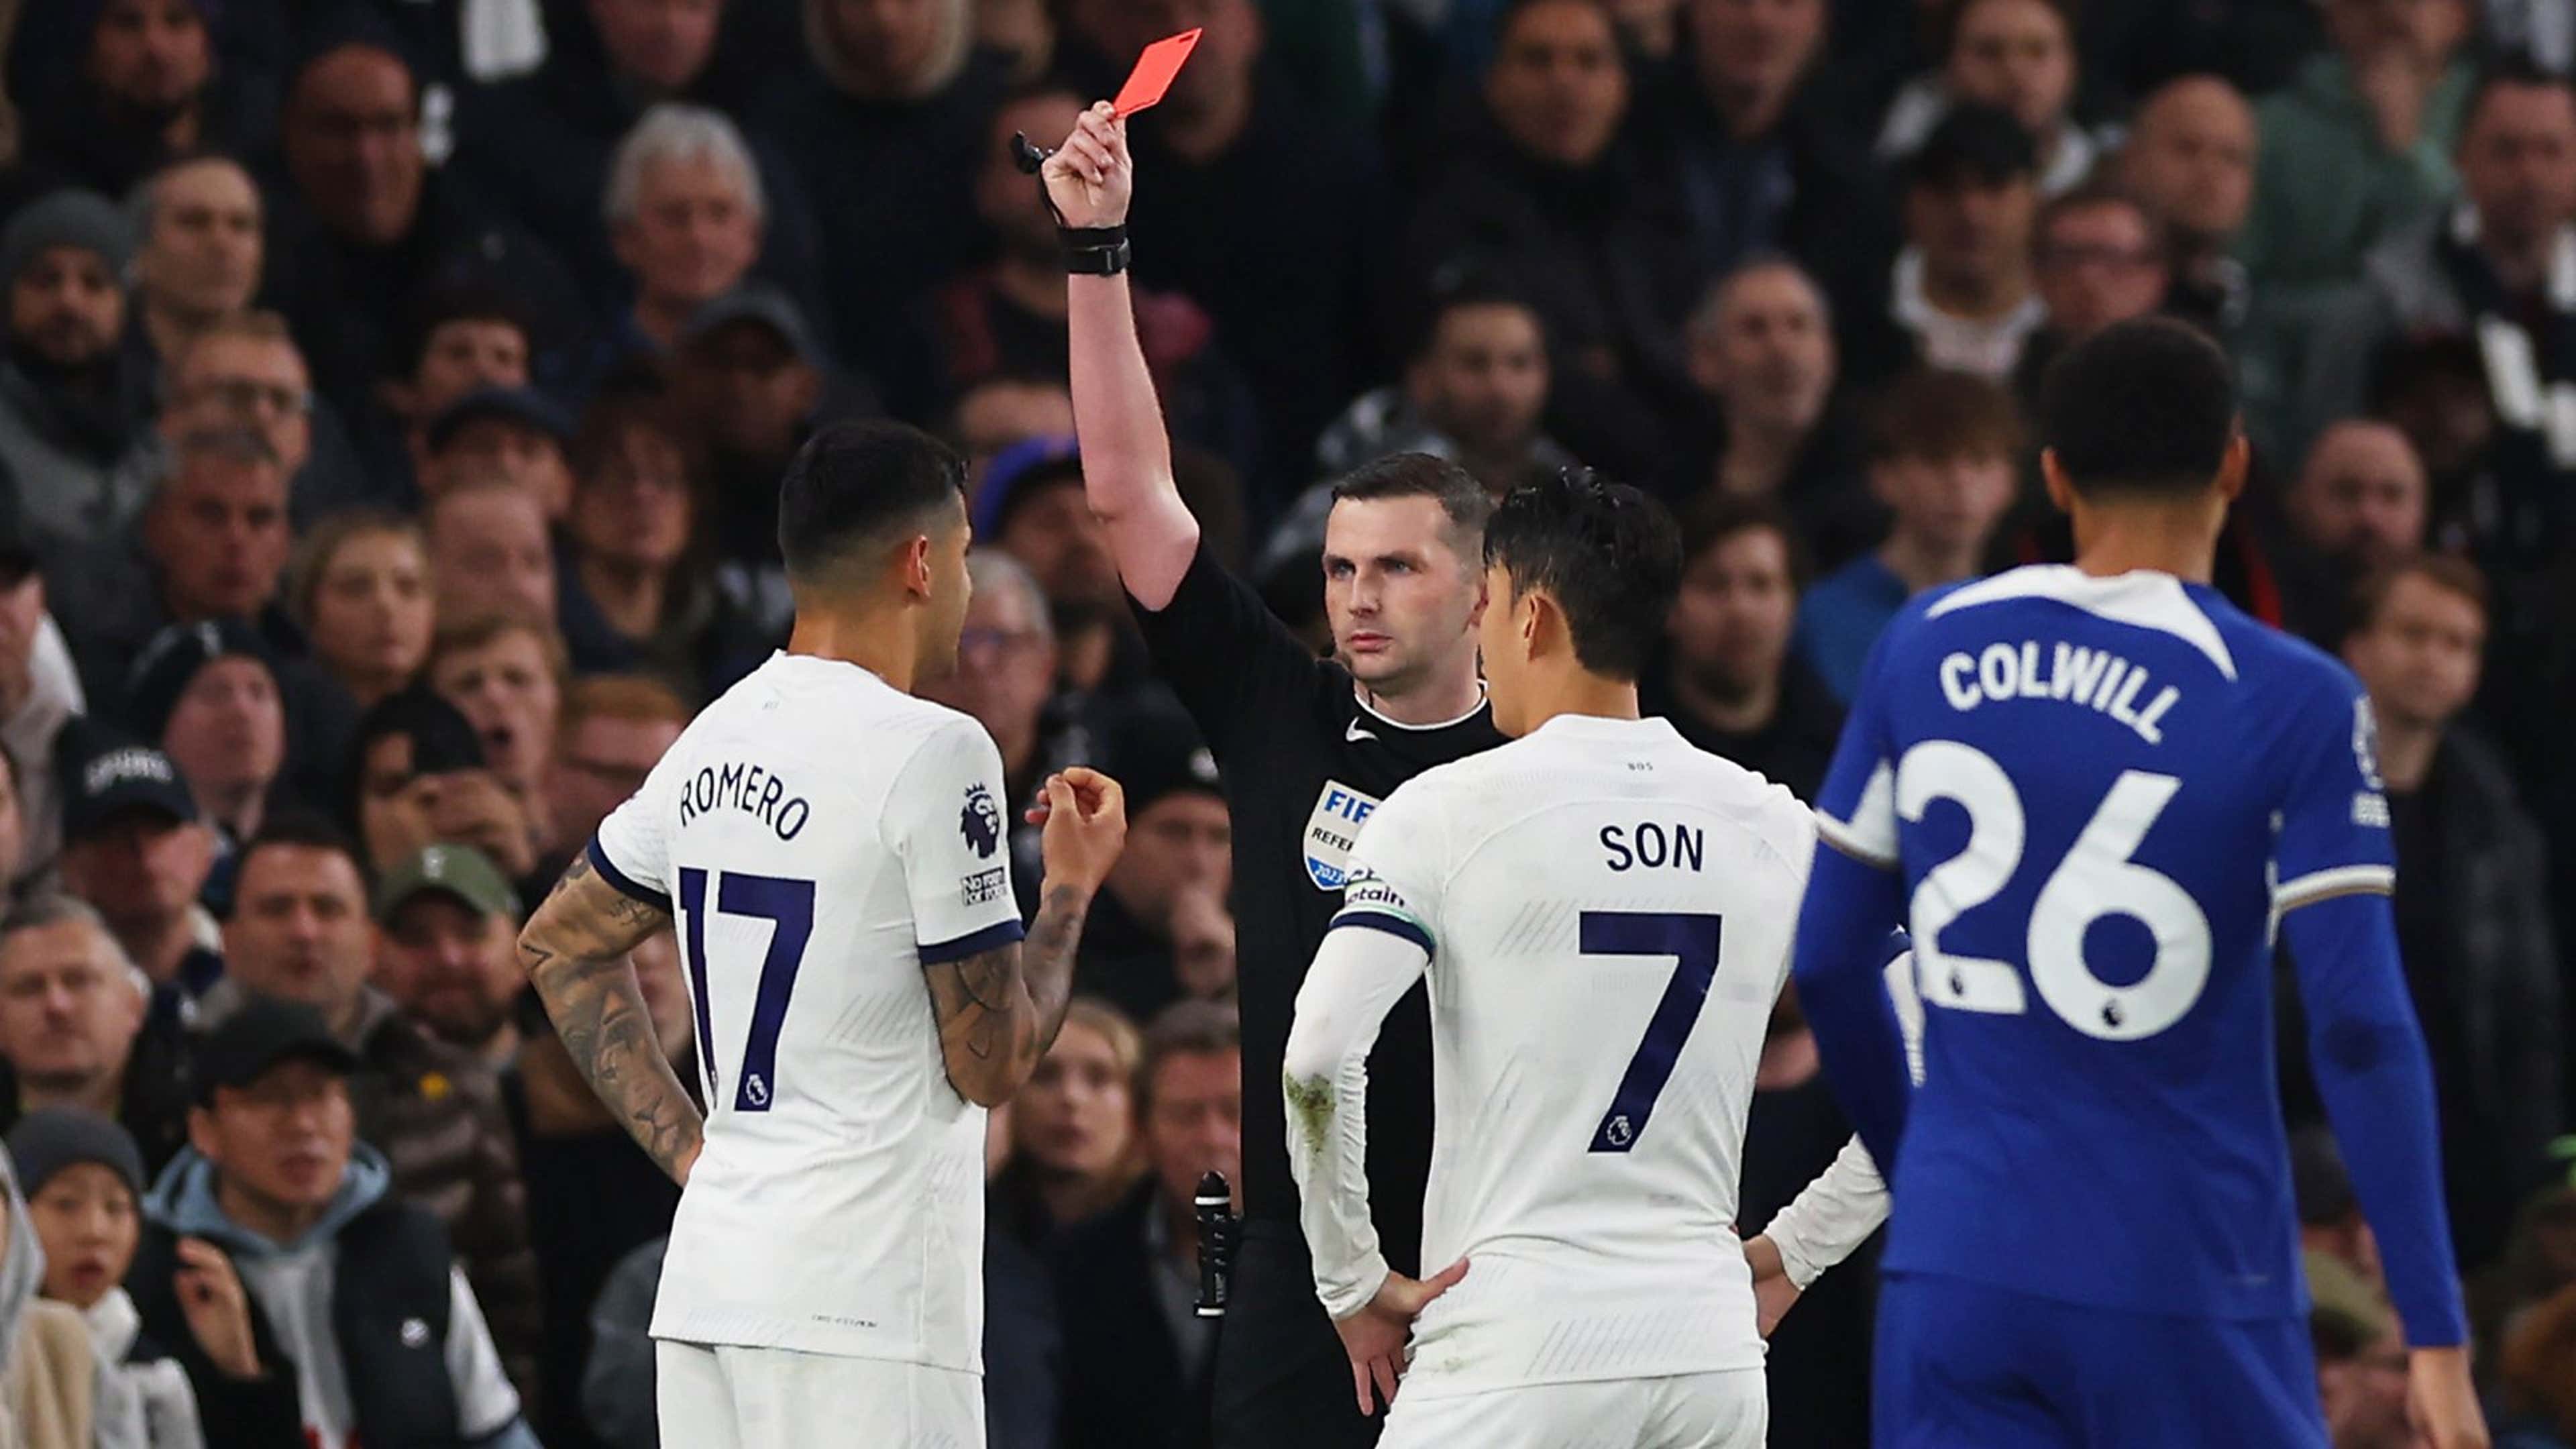 Tottenham's standing ovation after crushing Chelsea defeat summed up the  madness